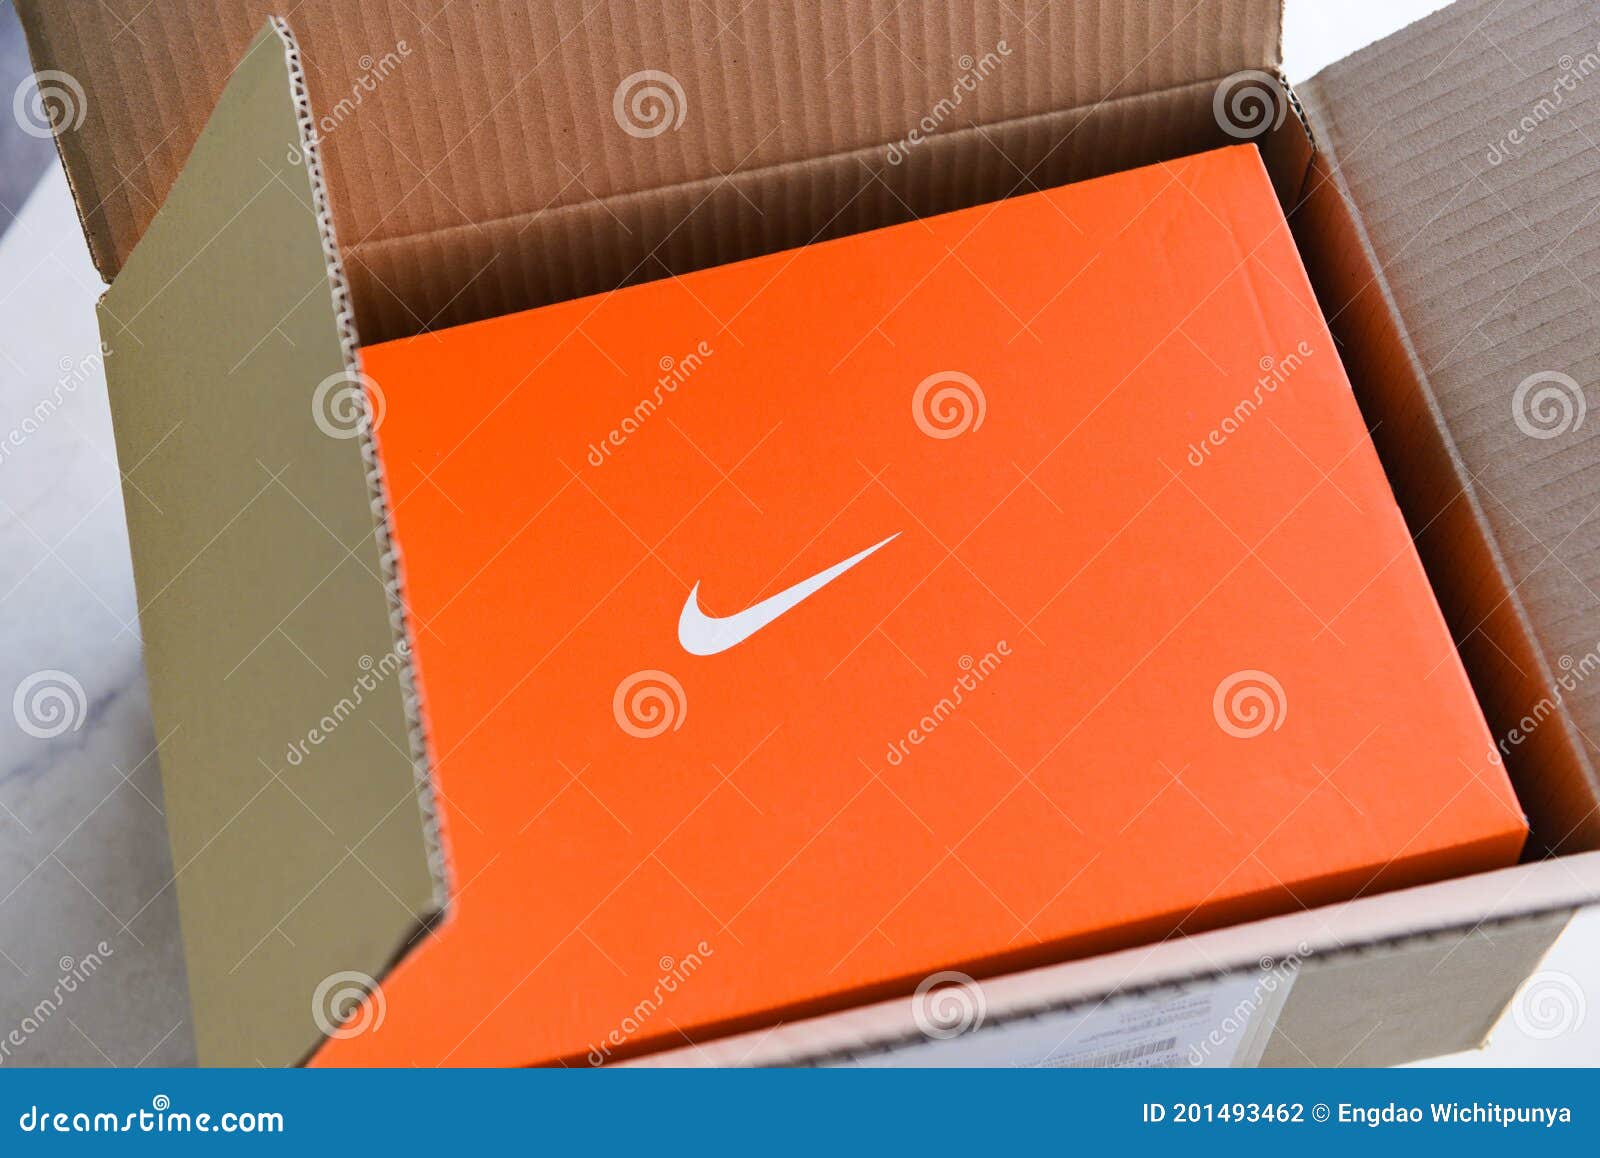 unforgivable animation brittle Nike Running Shoes Box with Nike Logo on Orange Box in the Store Editorial  Photography - Image of product, exercise: 201493462